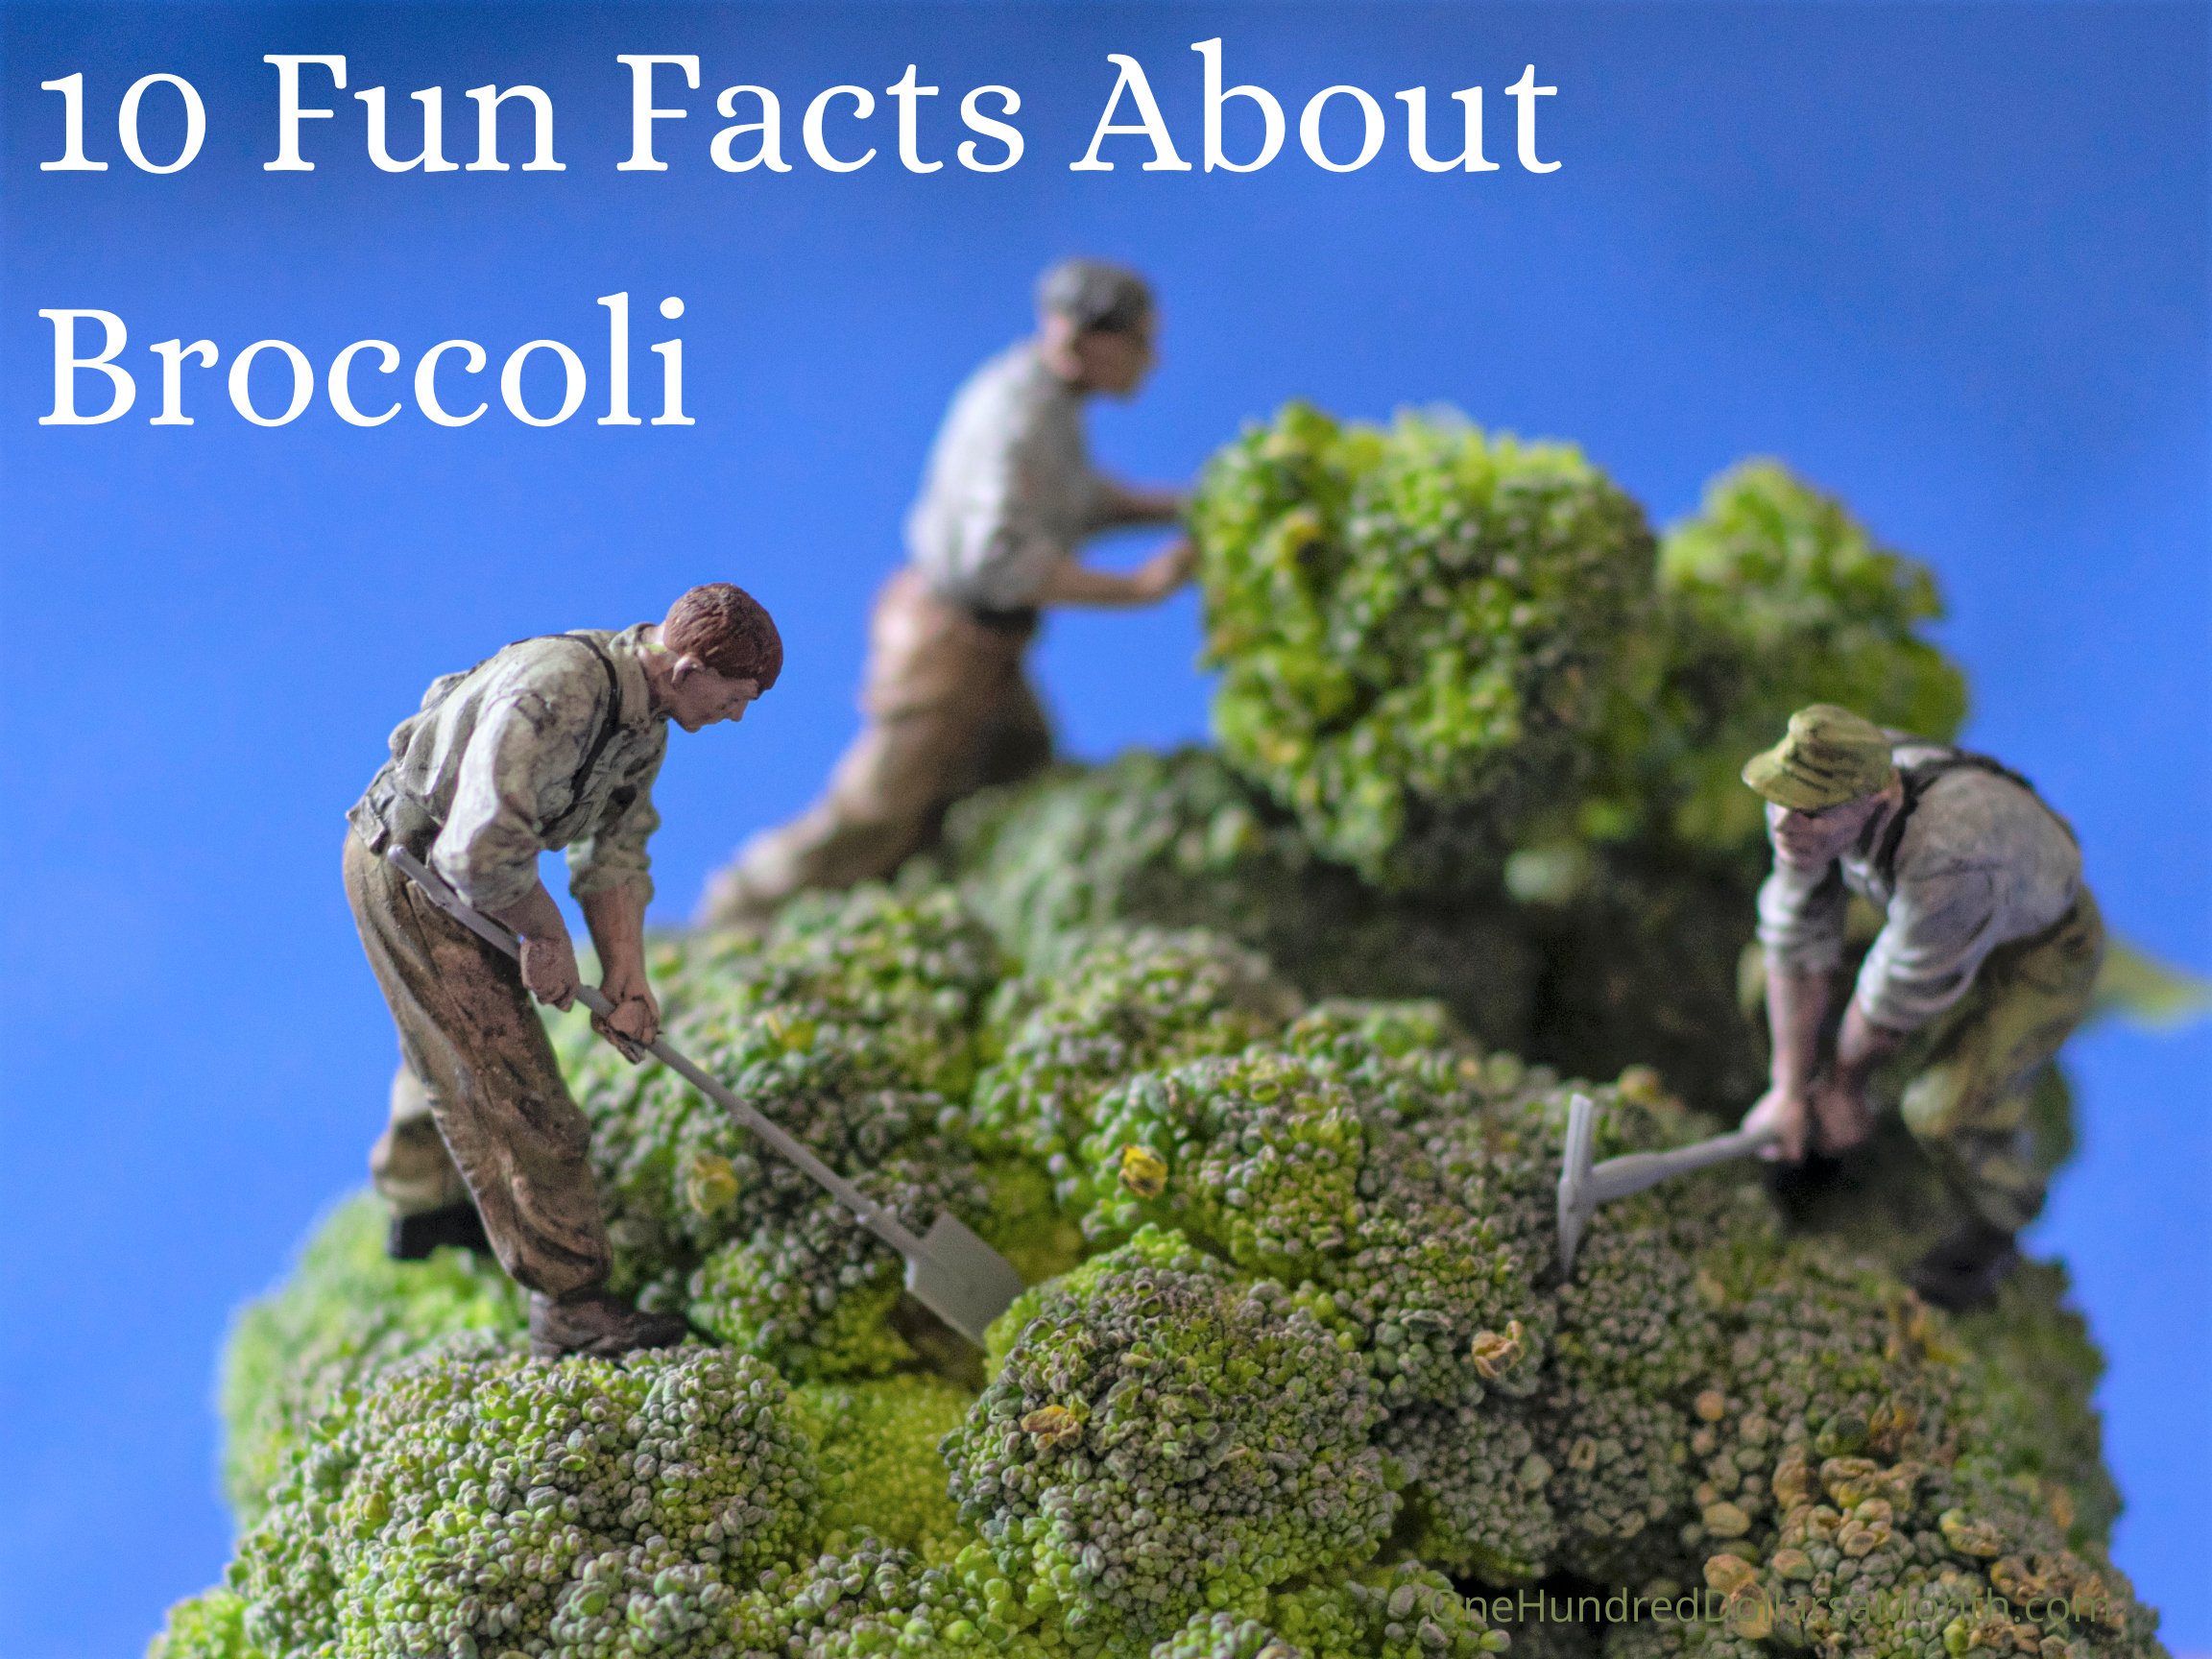 10 Fun Facts About Broccoli